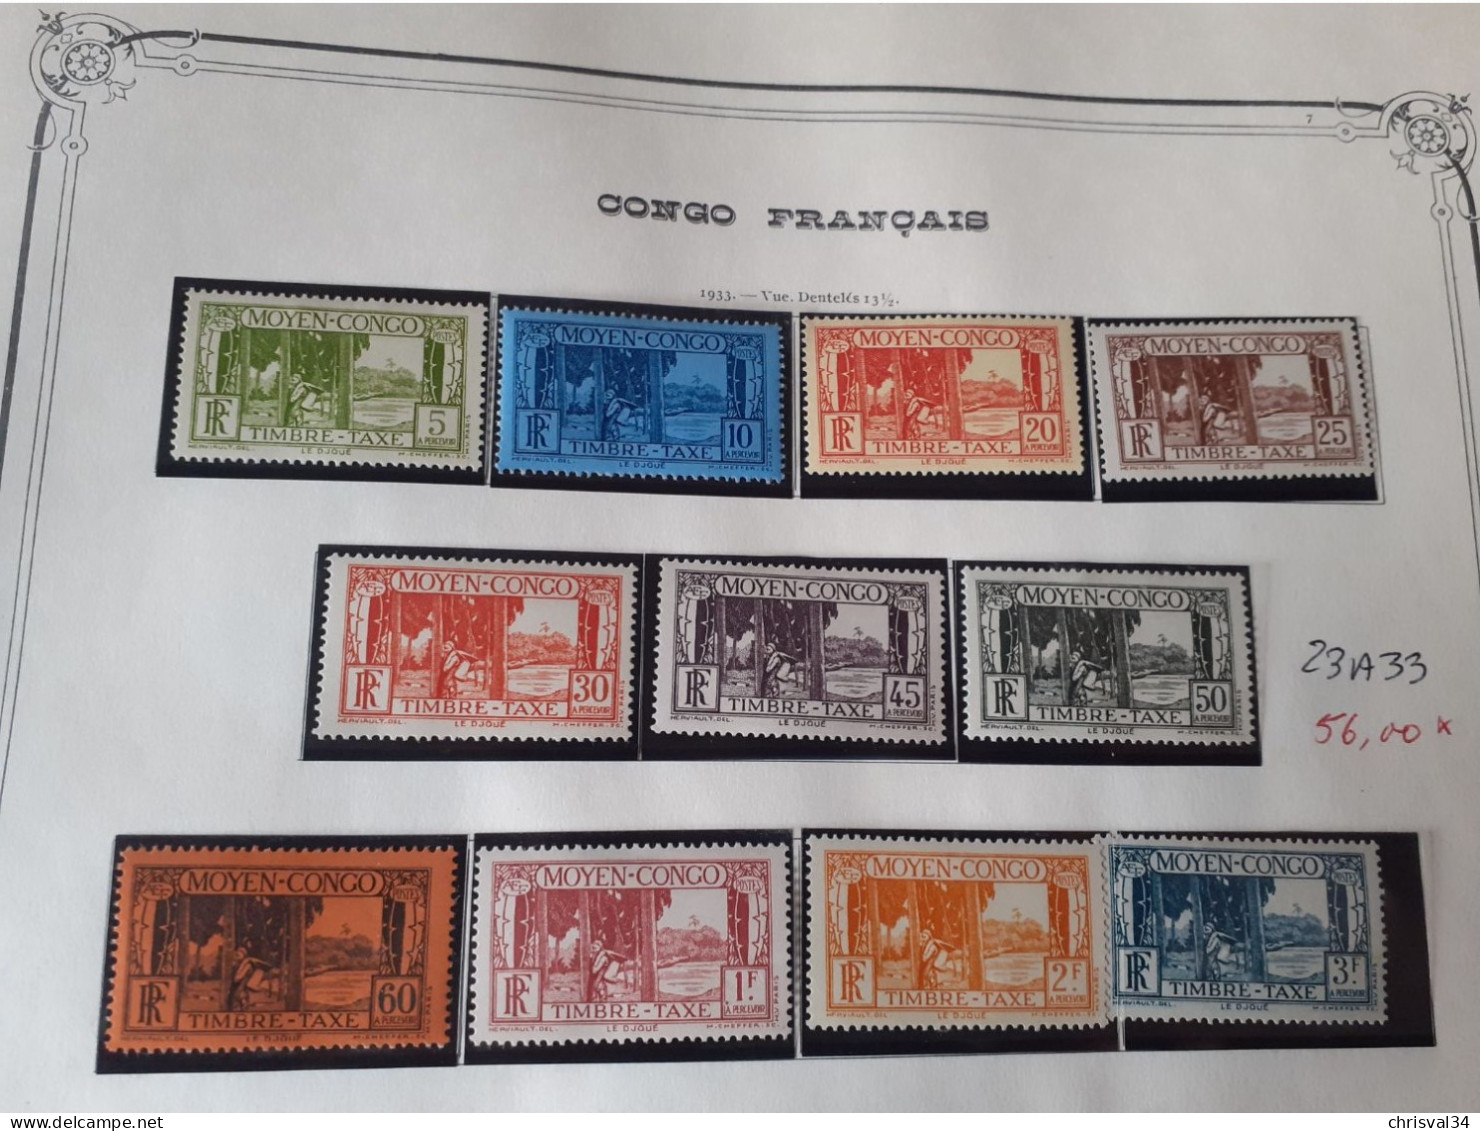 TIMBRES  CONGO SERIE  TAXE   N  23  A  33     COTE  56,00  EUROS    NEUFS  TRACE  CHARNIERES - Nuovi